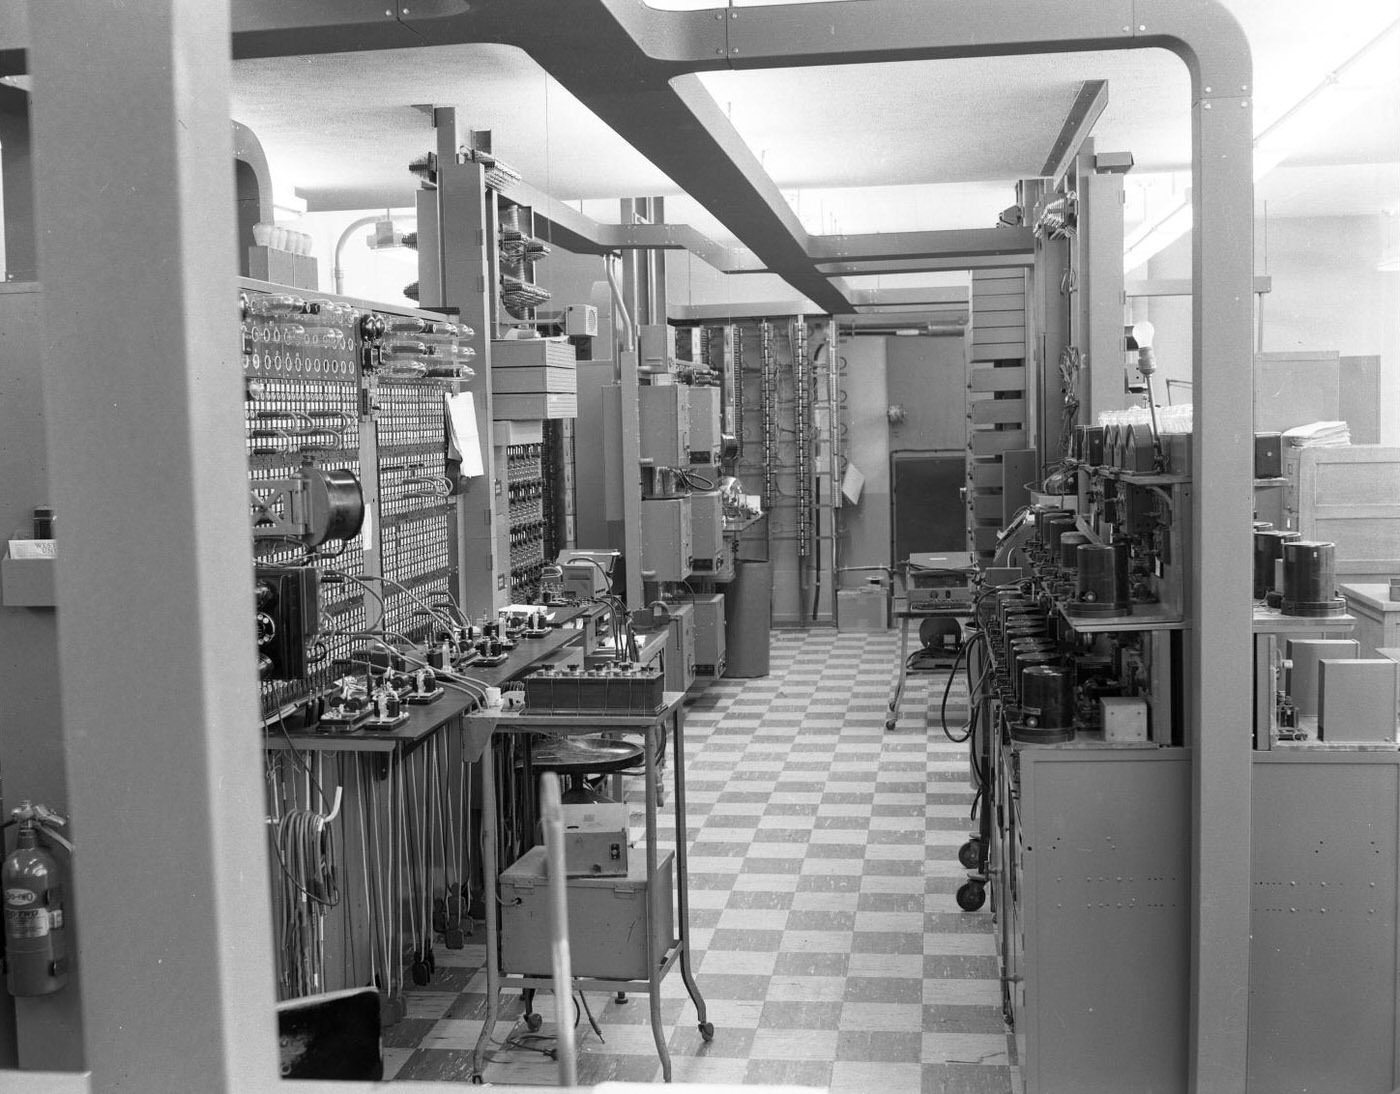 1950s Office with Telegraphy Equipment, 1954.